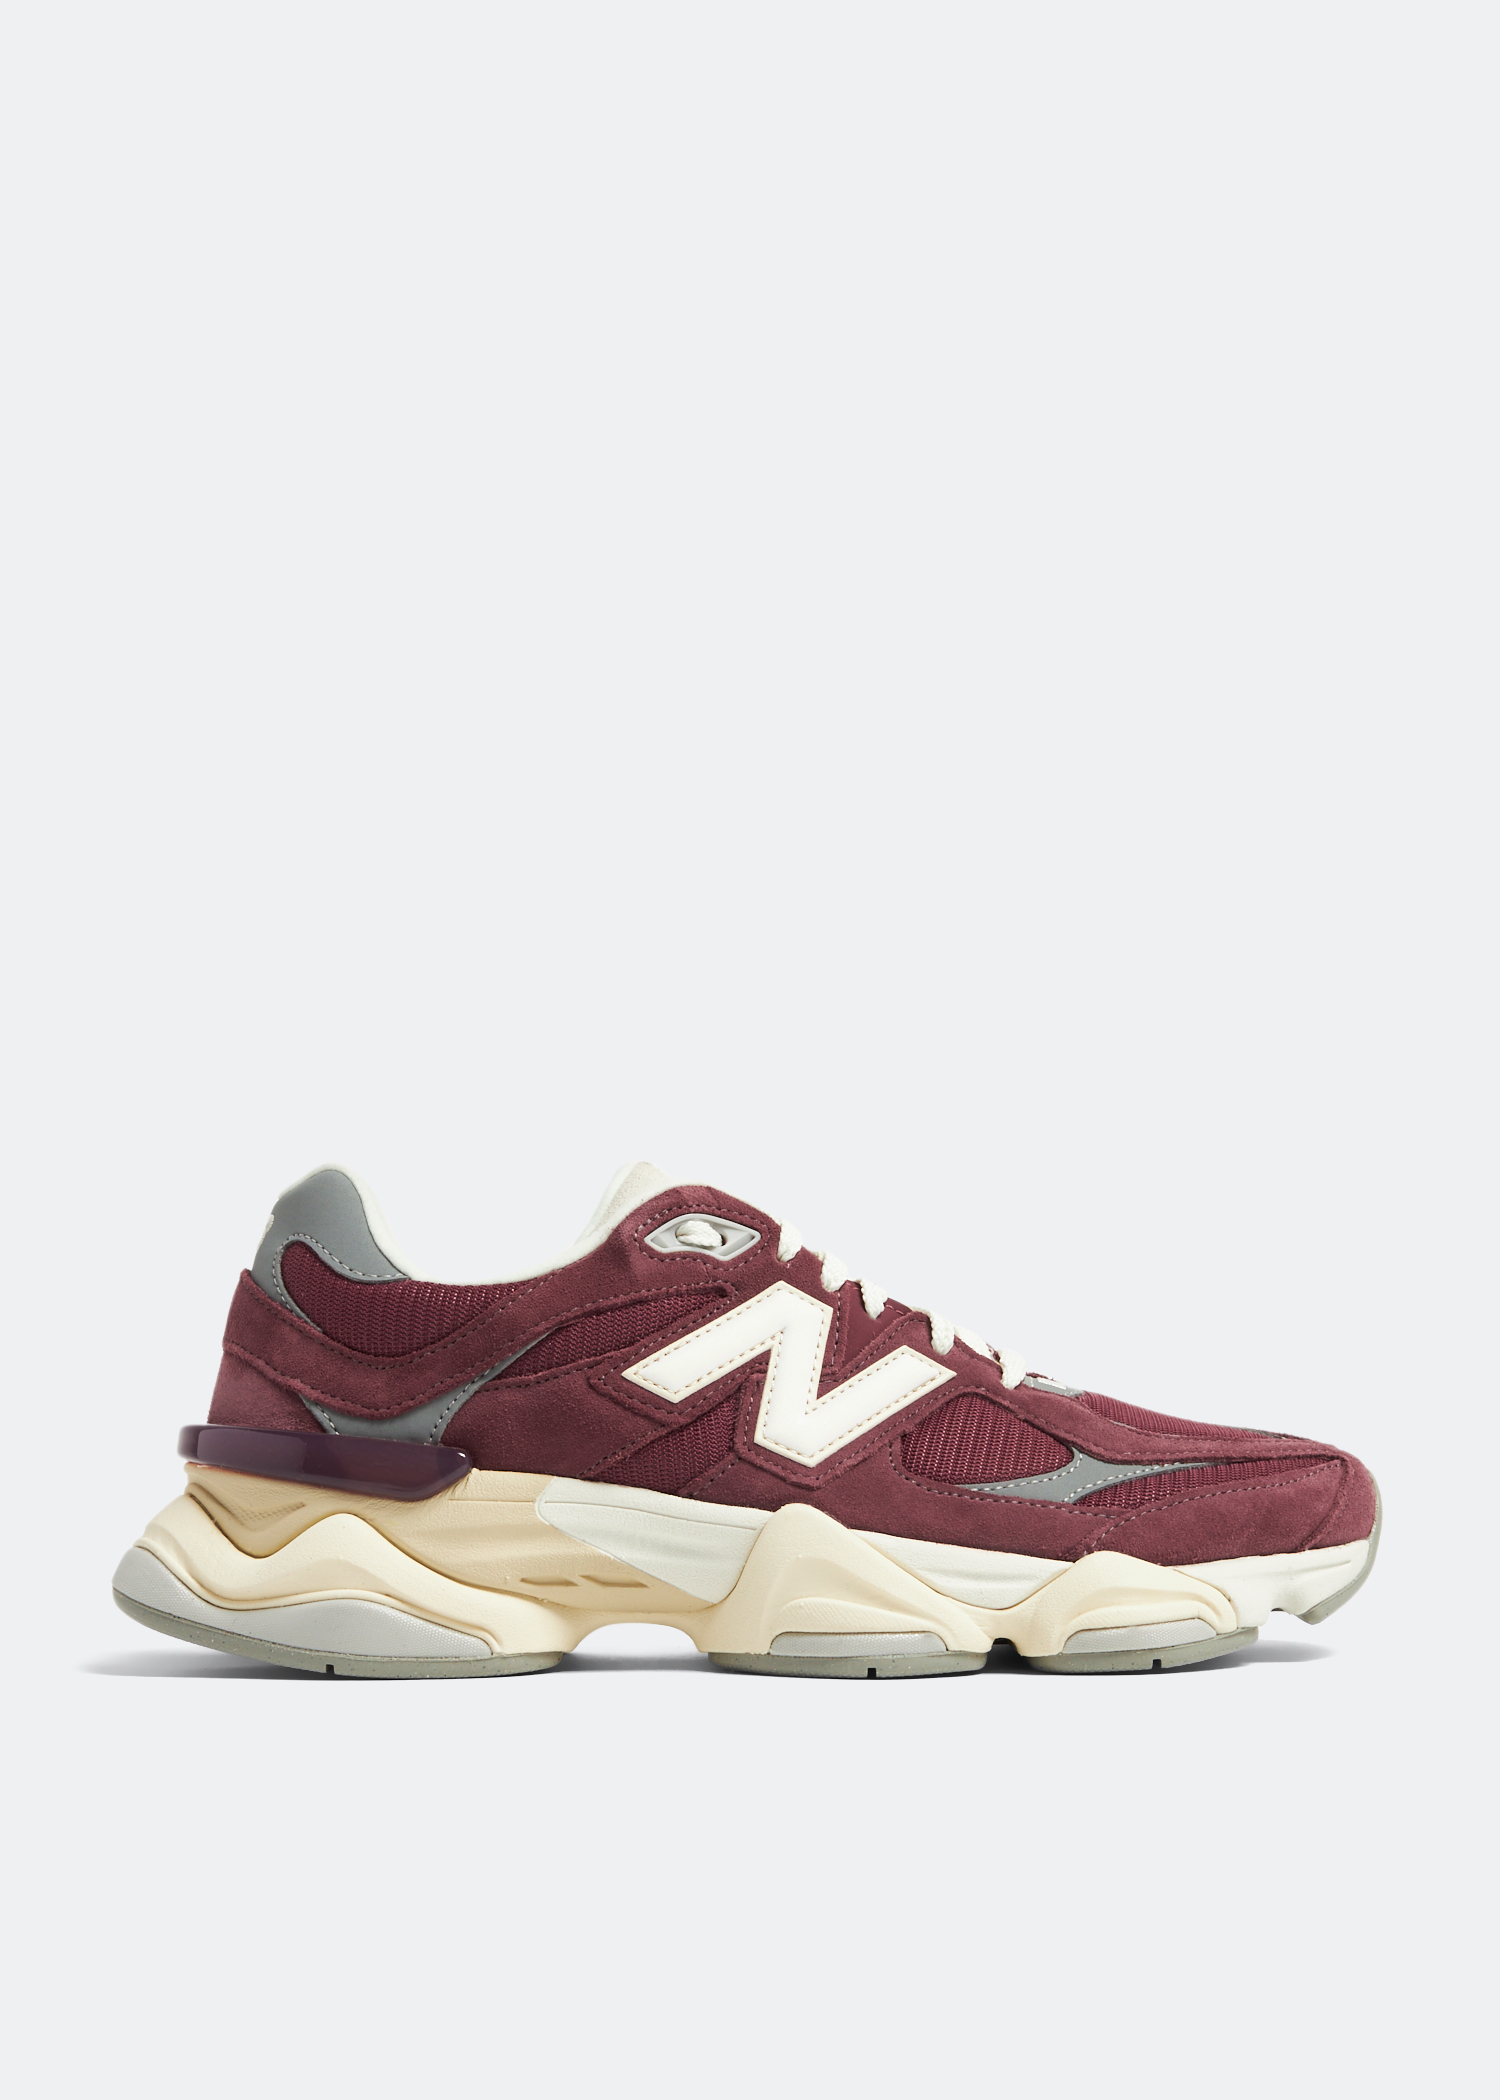 New Balance 9060 sneakers for Women - Burgundy in UAE | Level Shoes